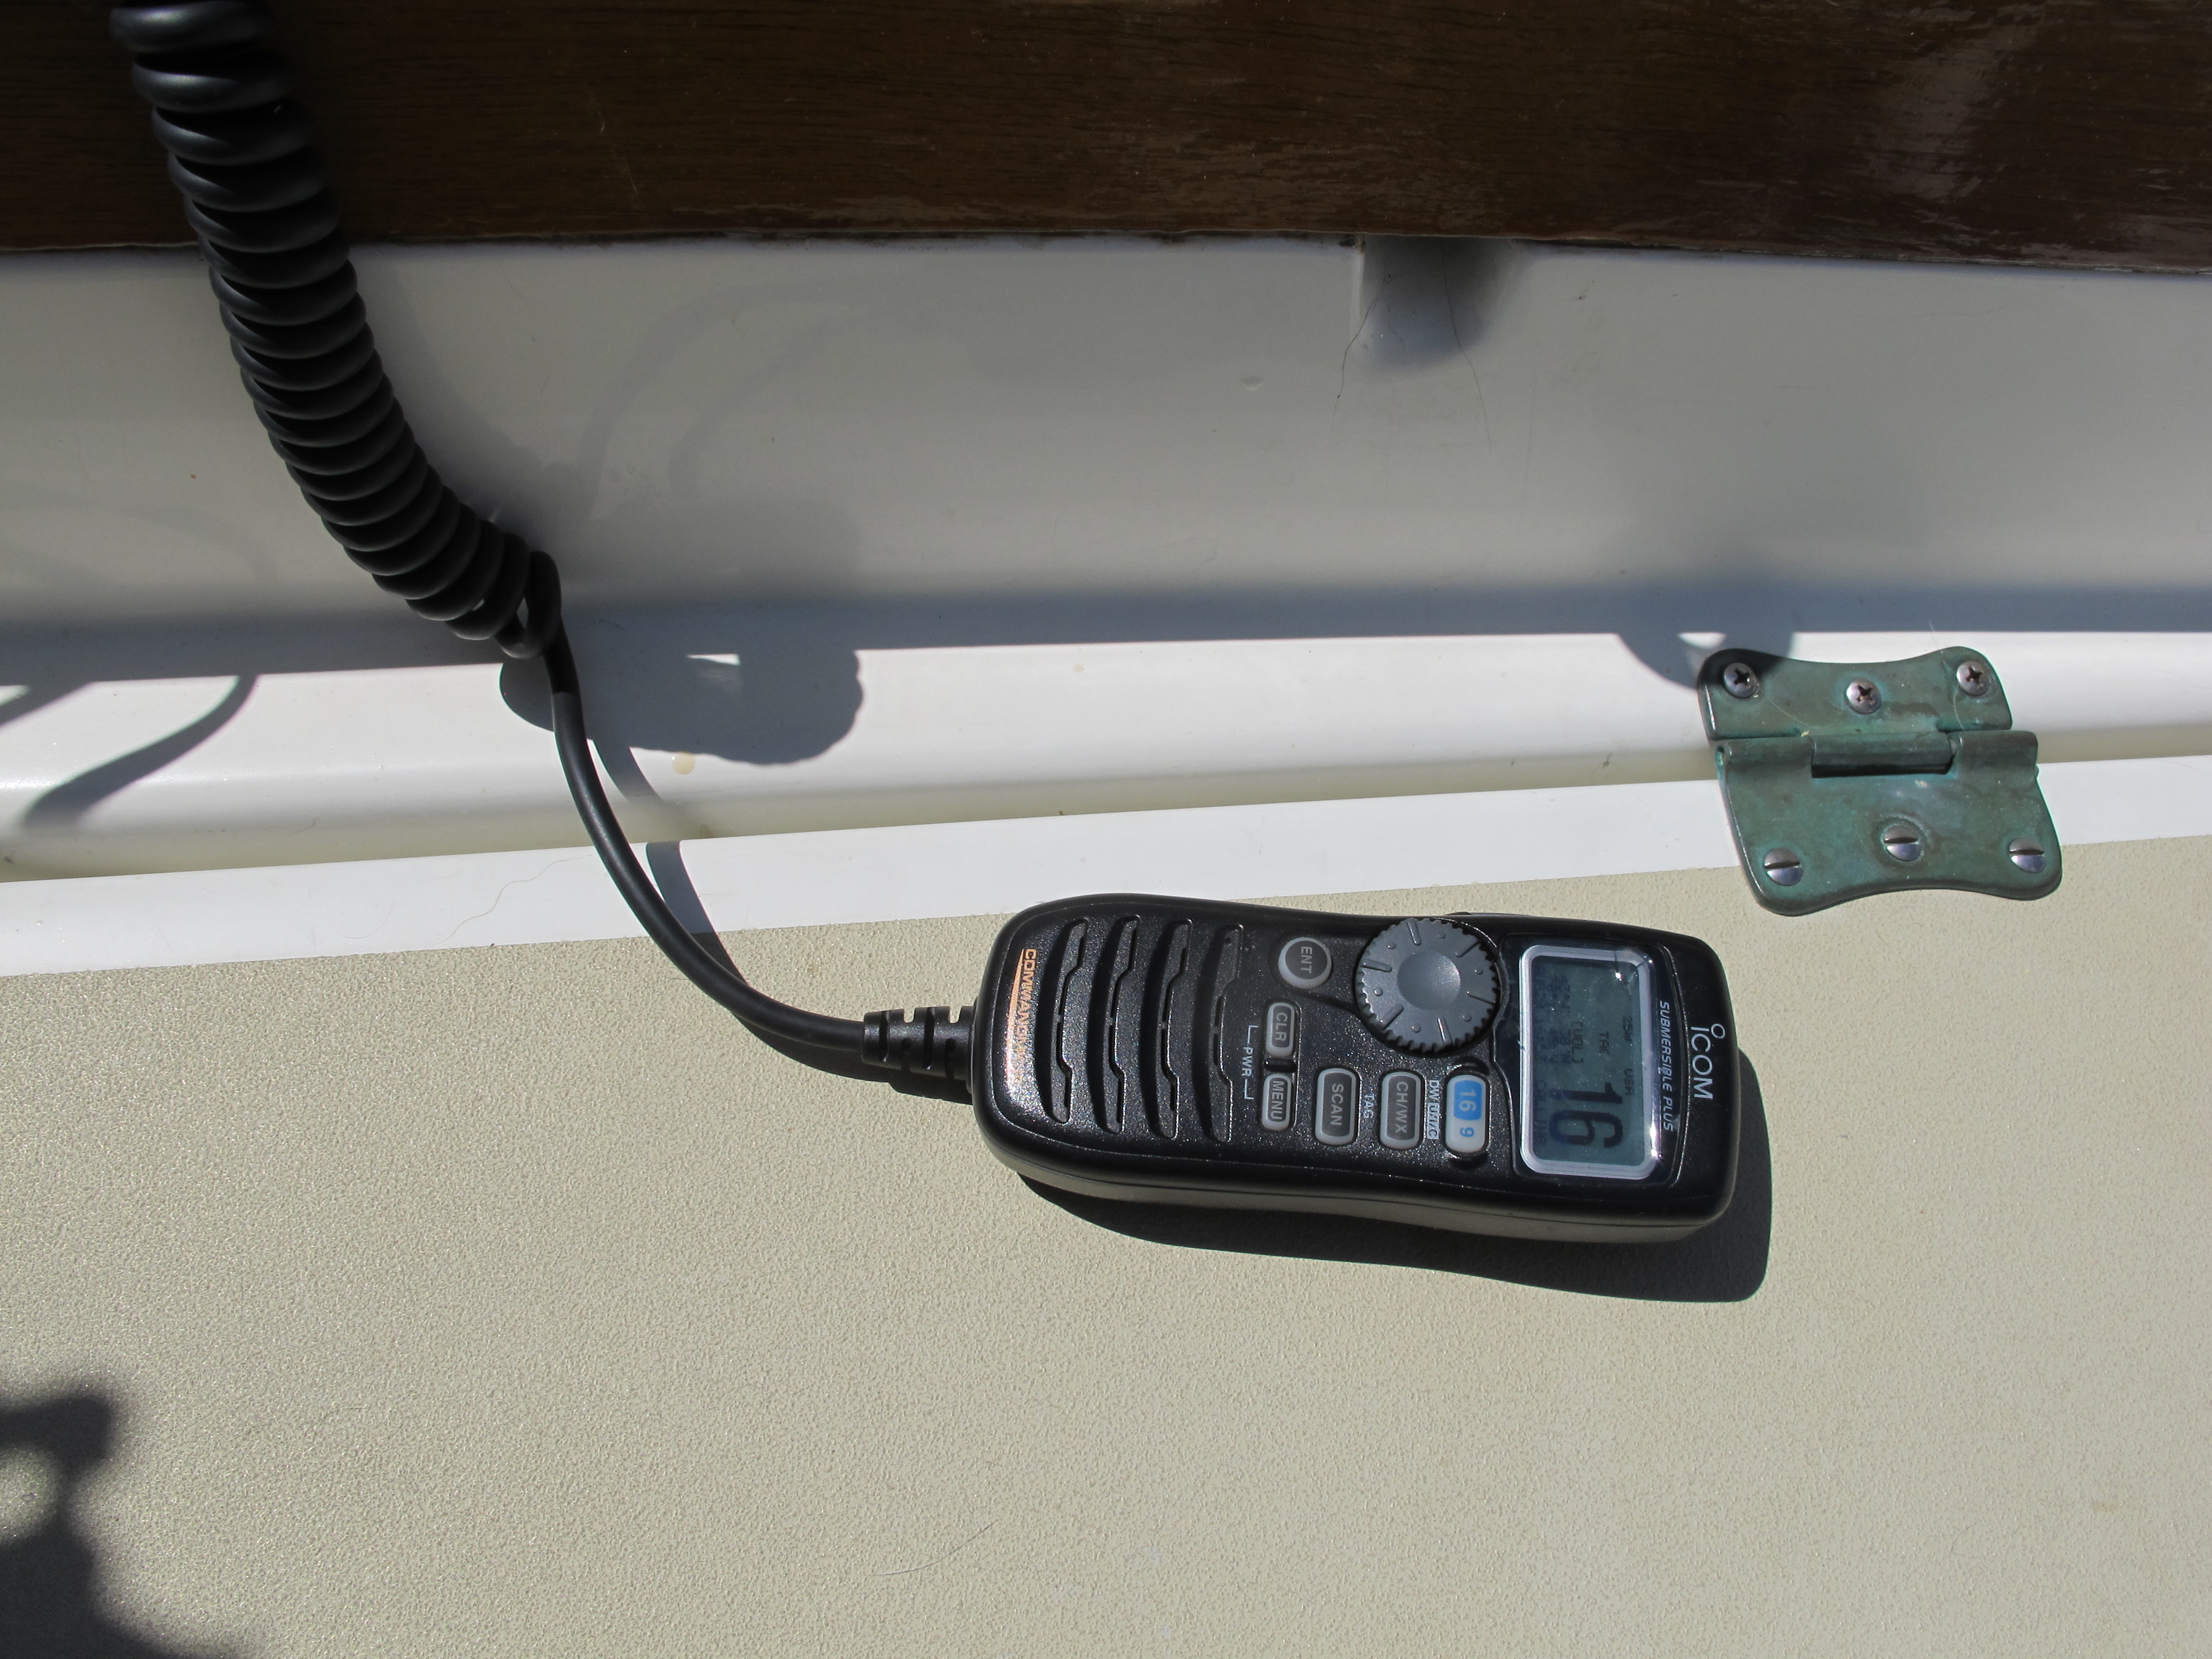 VHF Remote Mike